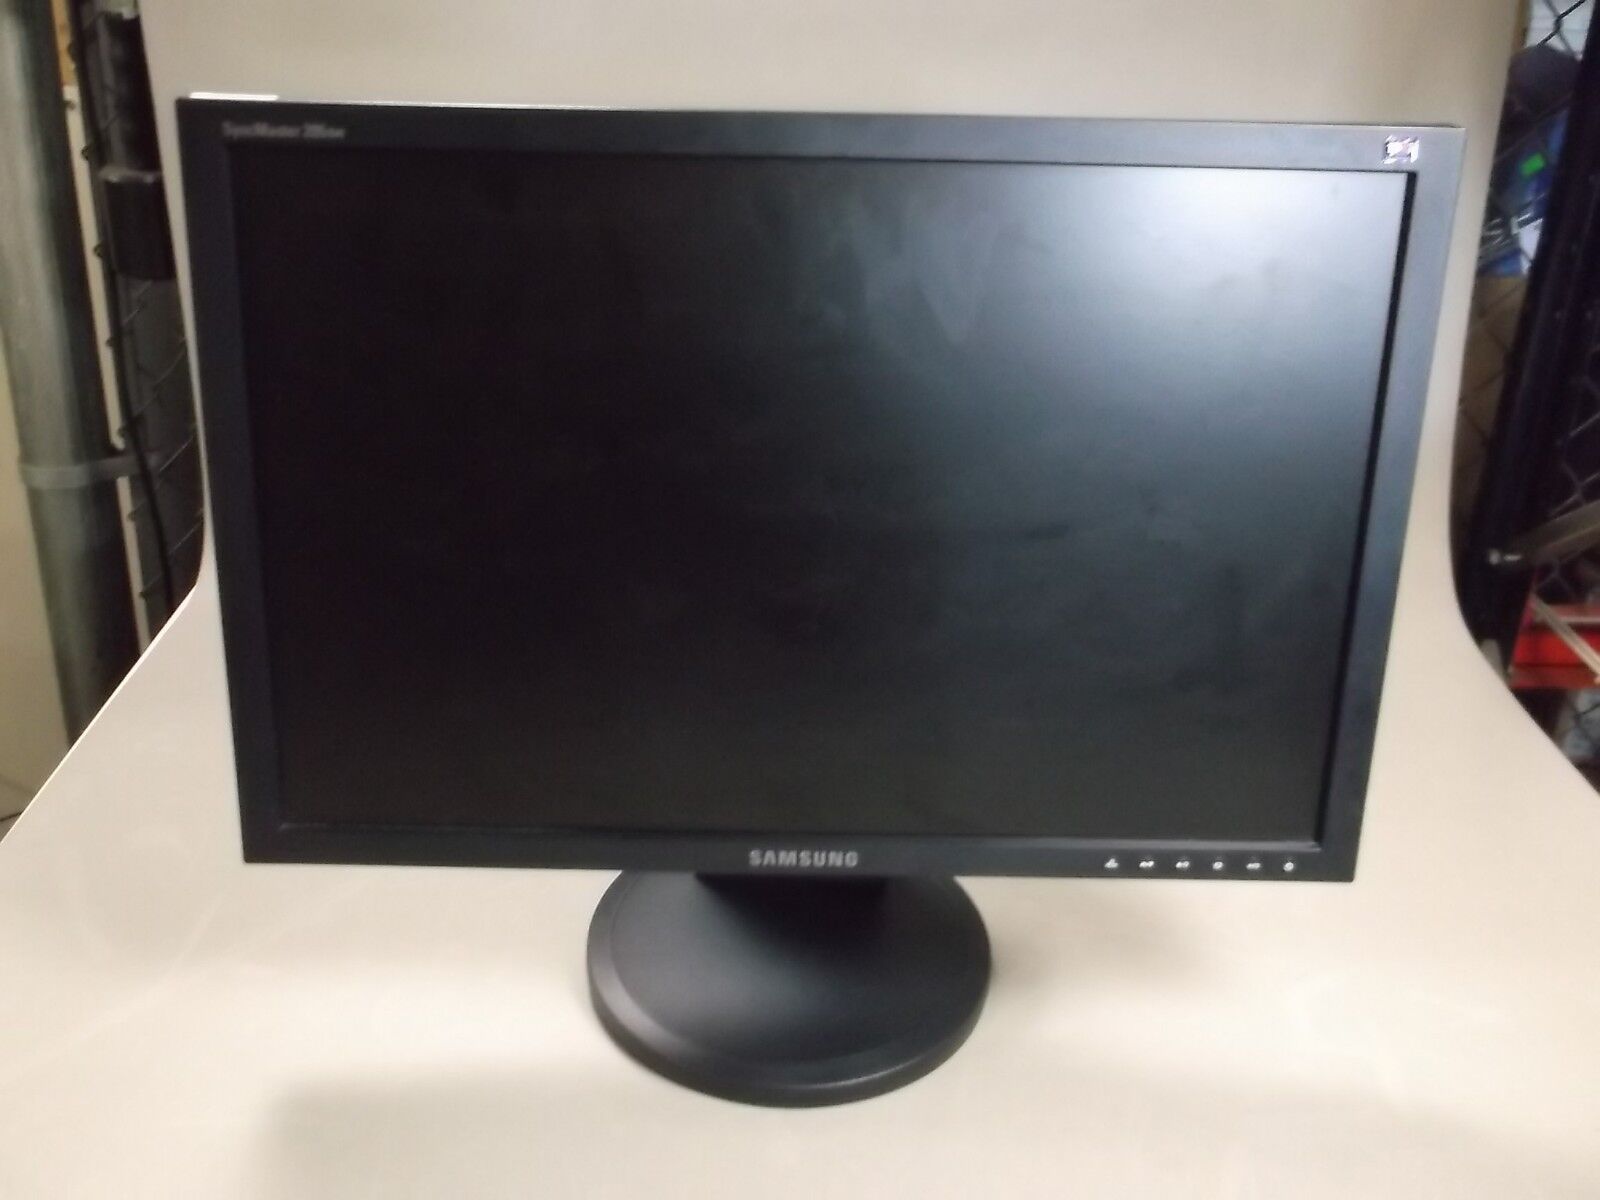 Samsung Syncmaster 205BW 20-In Monitor w/ Adjustable Stand 30 DAY WARRANTY